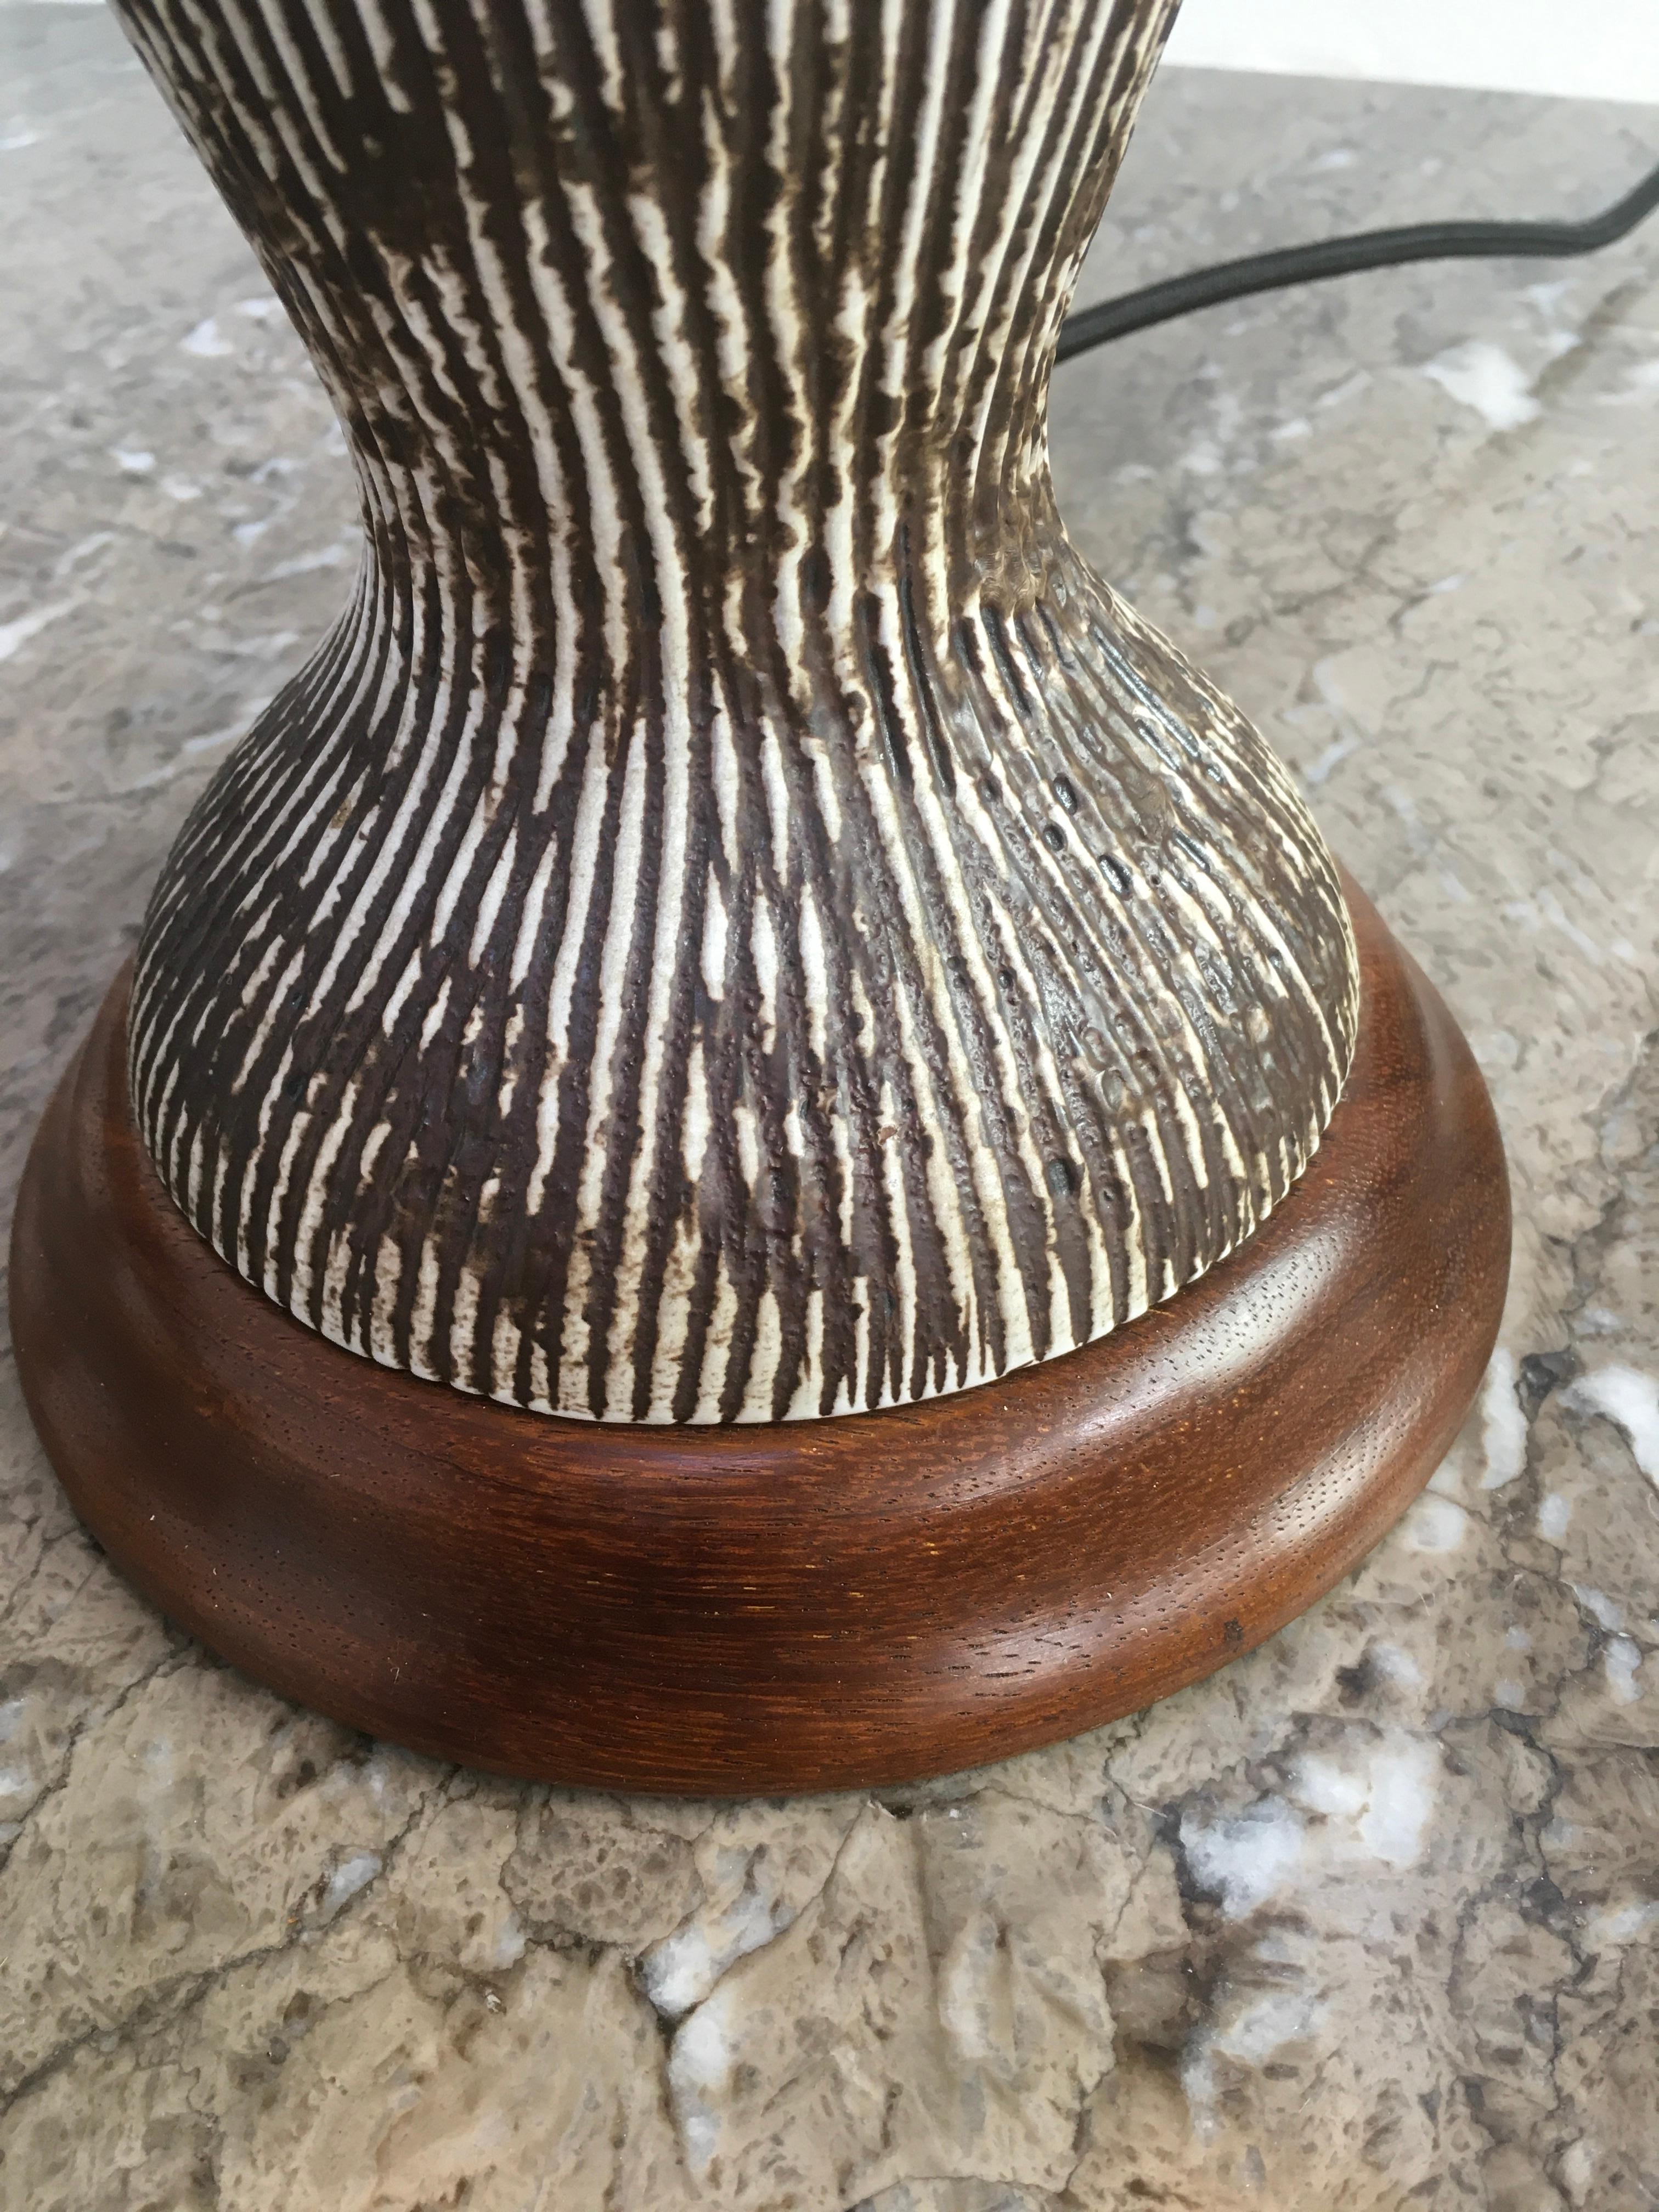 Ellis Pottery Sgraffito Ceramic and 'Walnut' Table Lamp Base Melbourne, 1950s For Sale 2